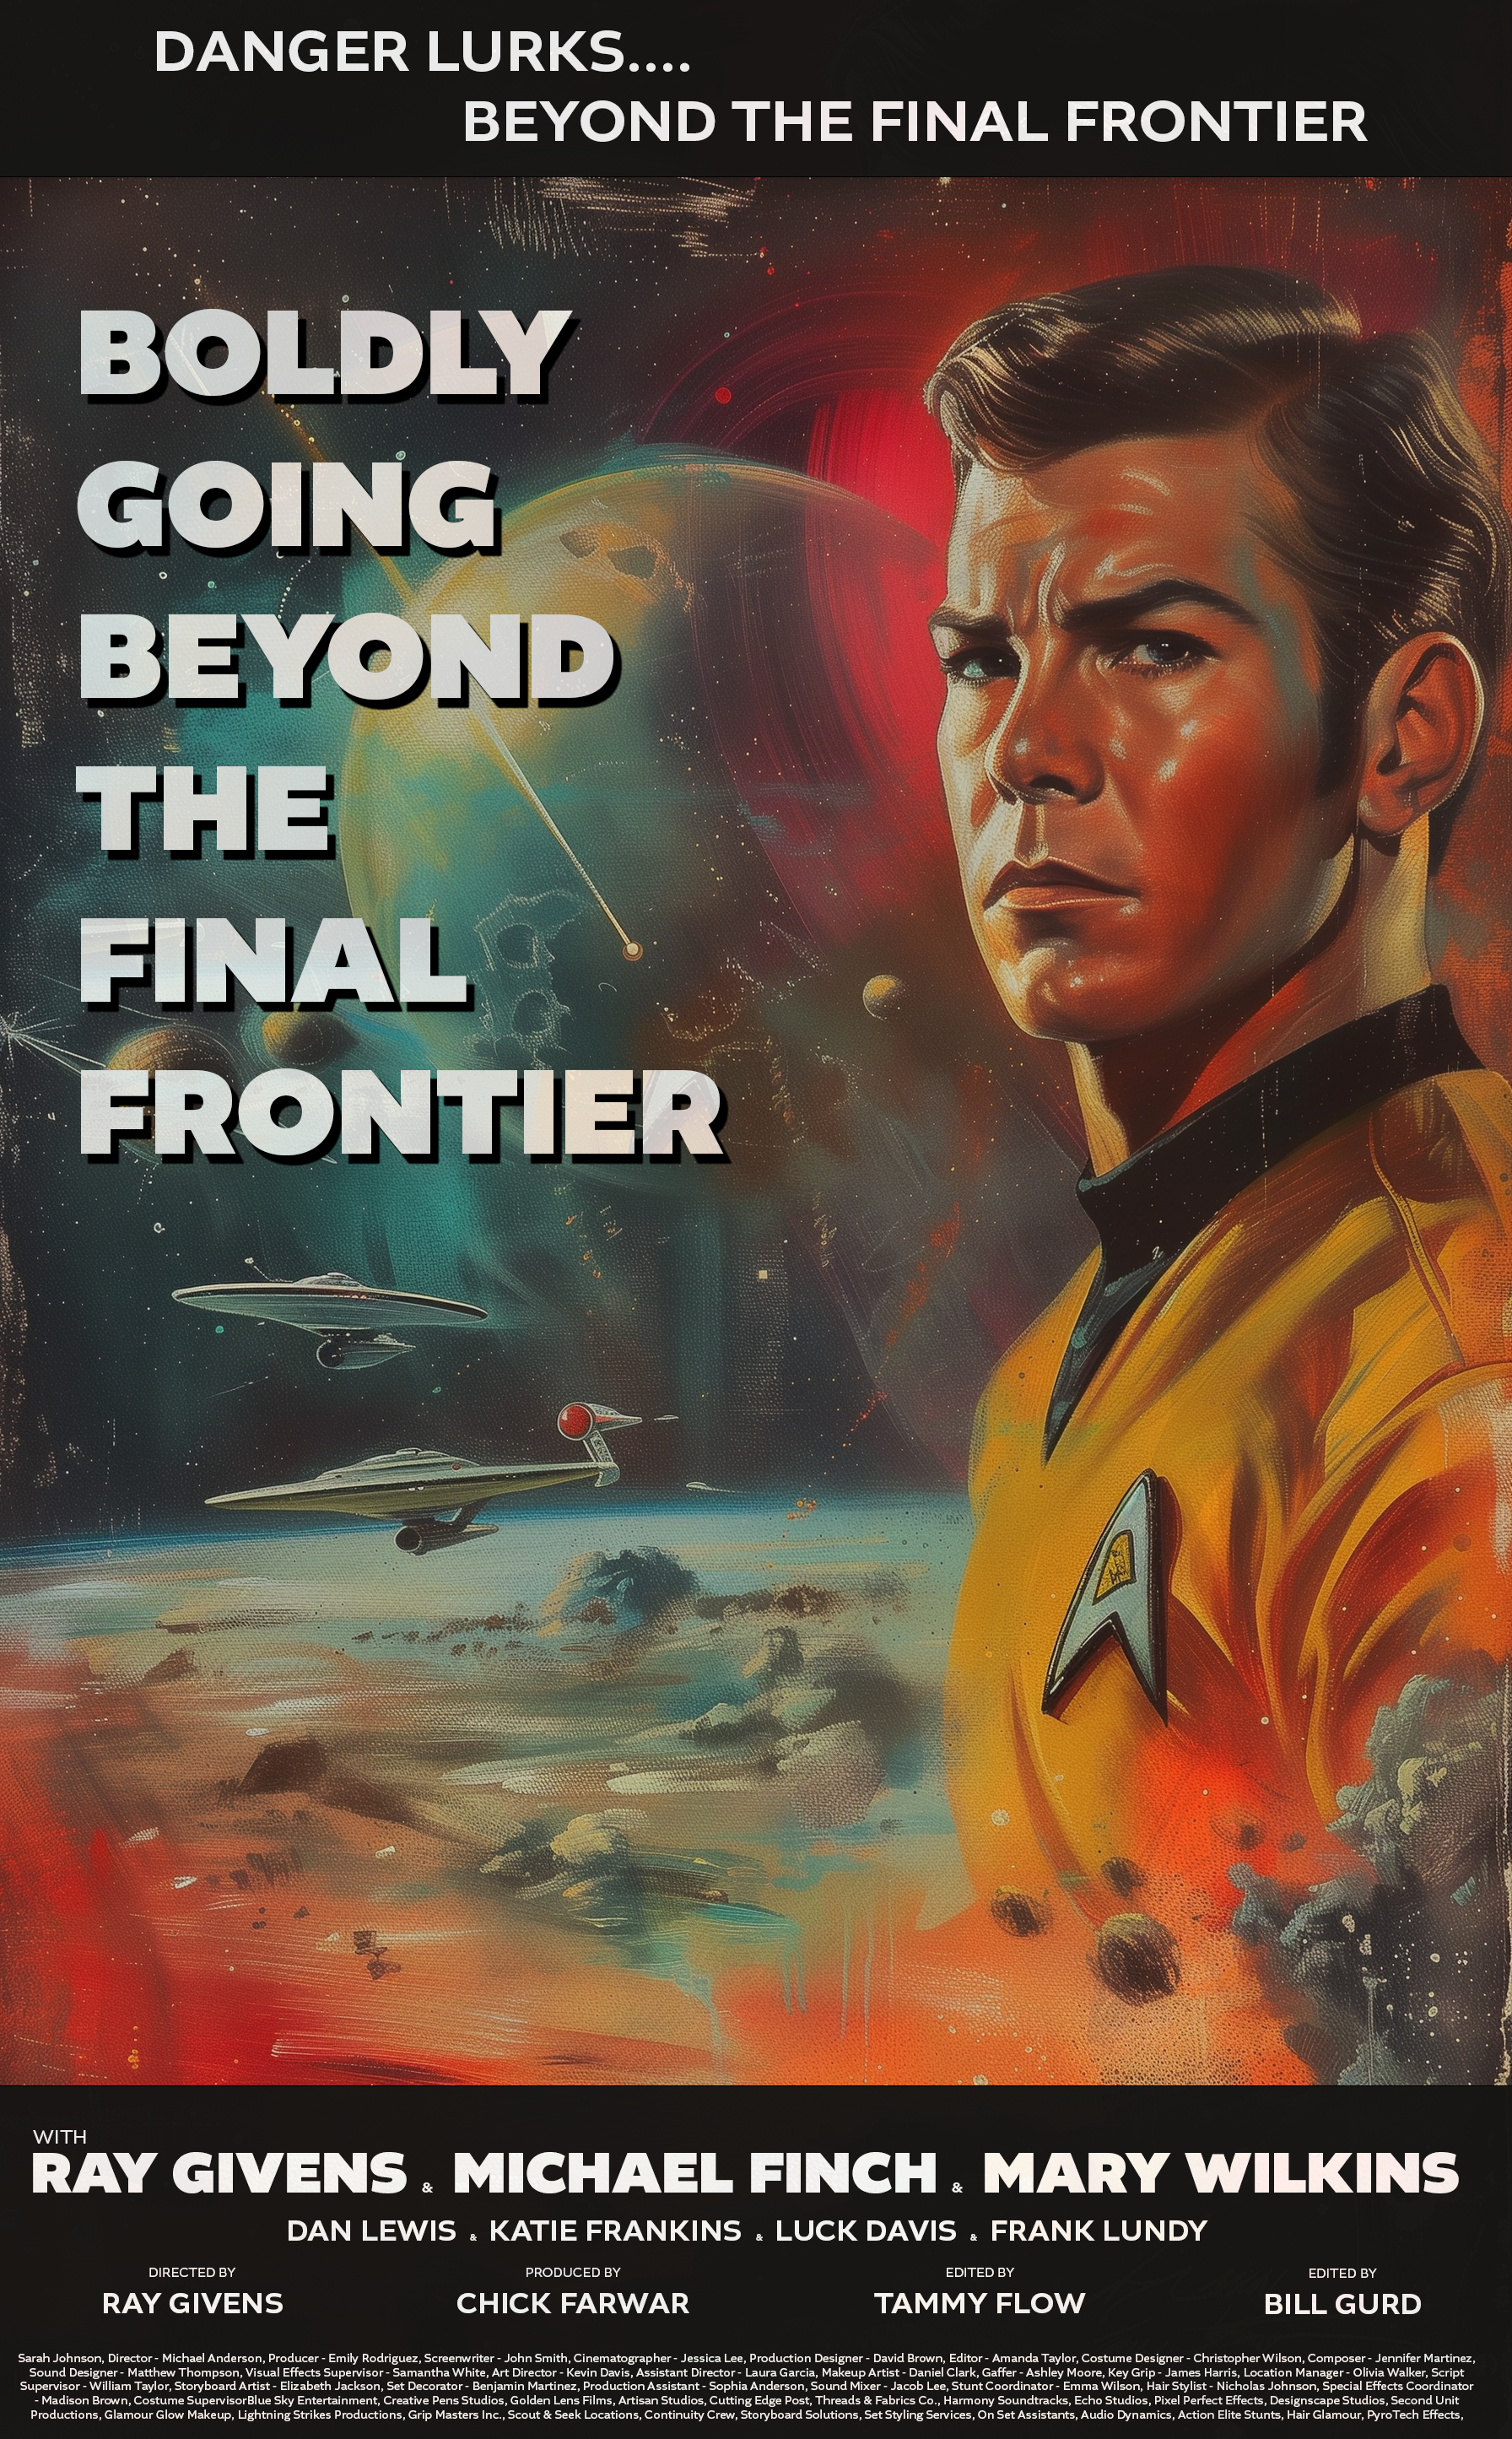 Name:  Beyond the Final Frontier.png
Views: 153
Size:  8.19 MB